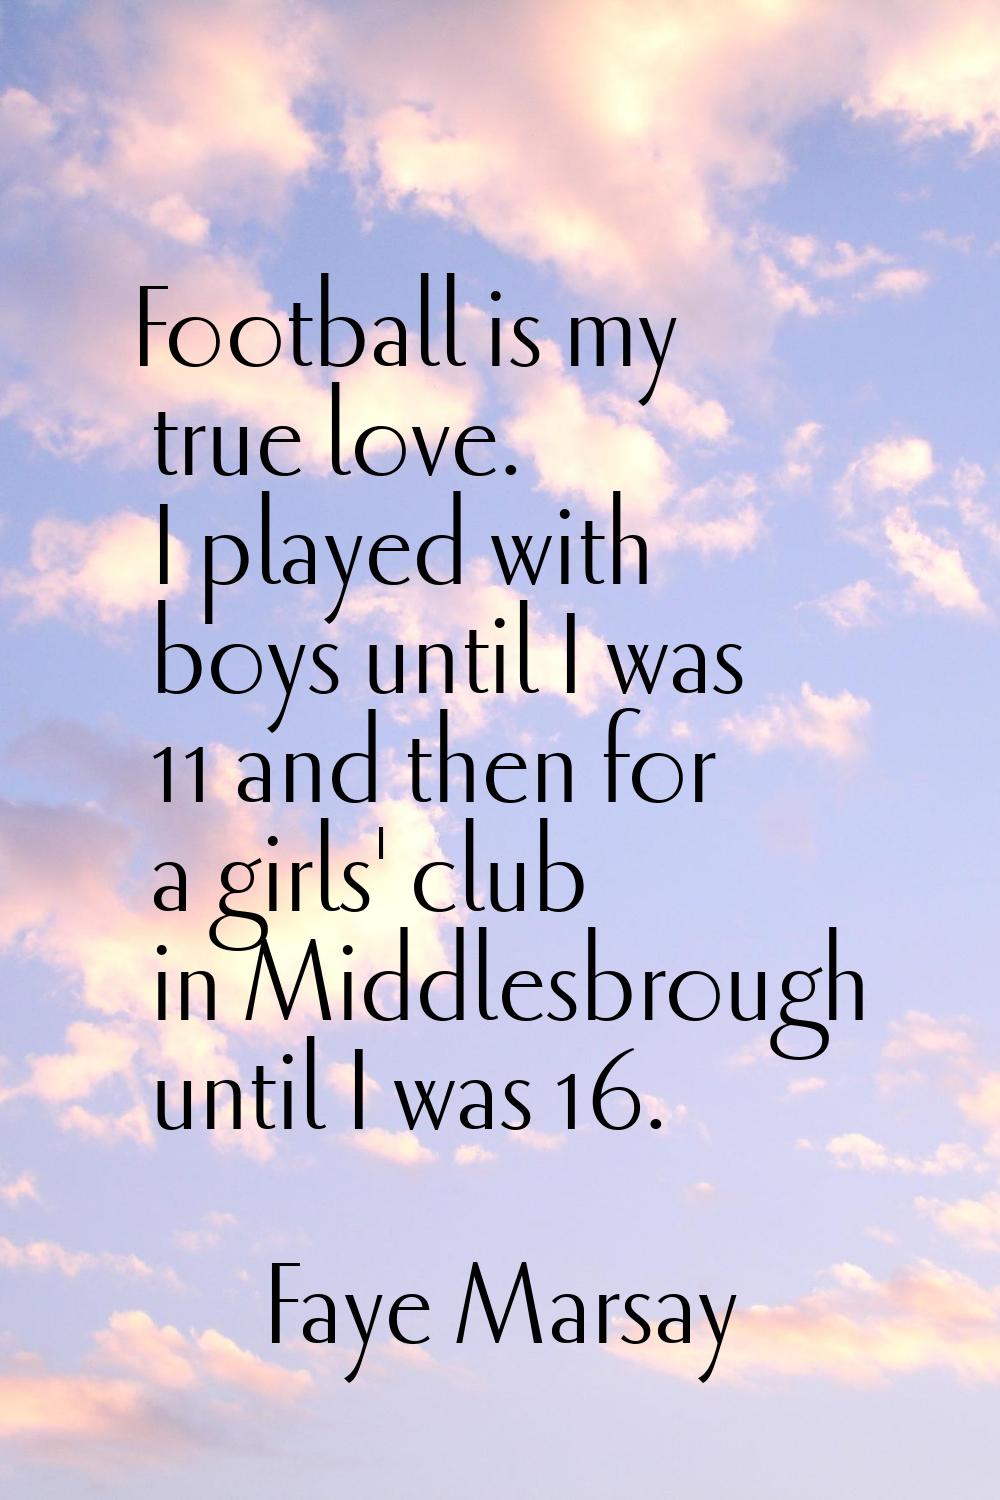 Football is my true love. I played with boys until I was 11 and then for a girls' club in Middlesbr